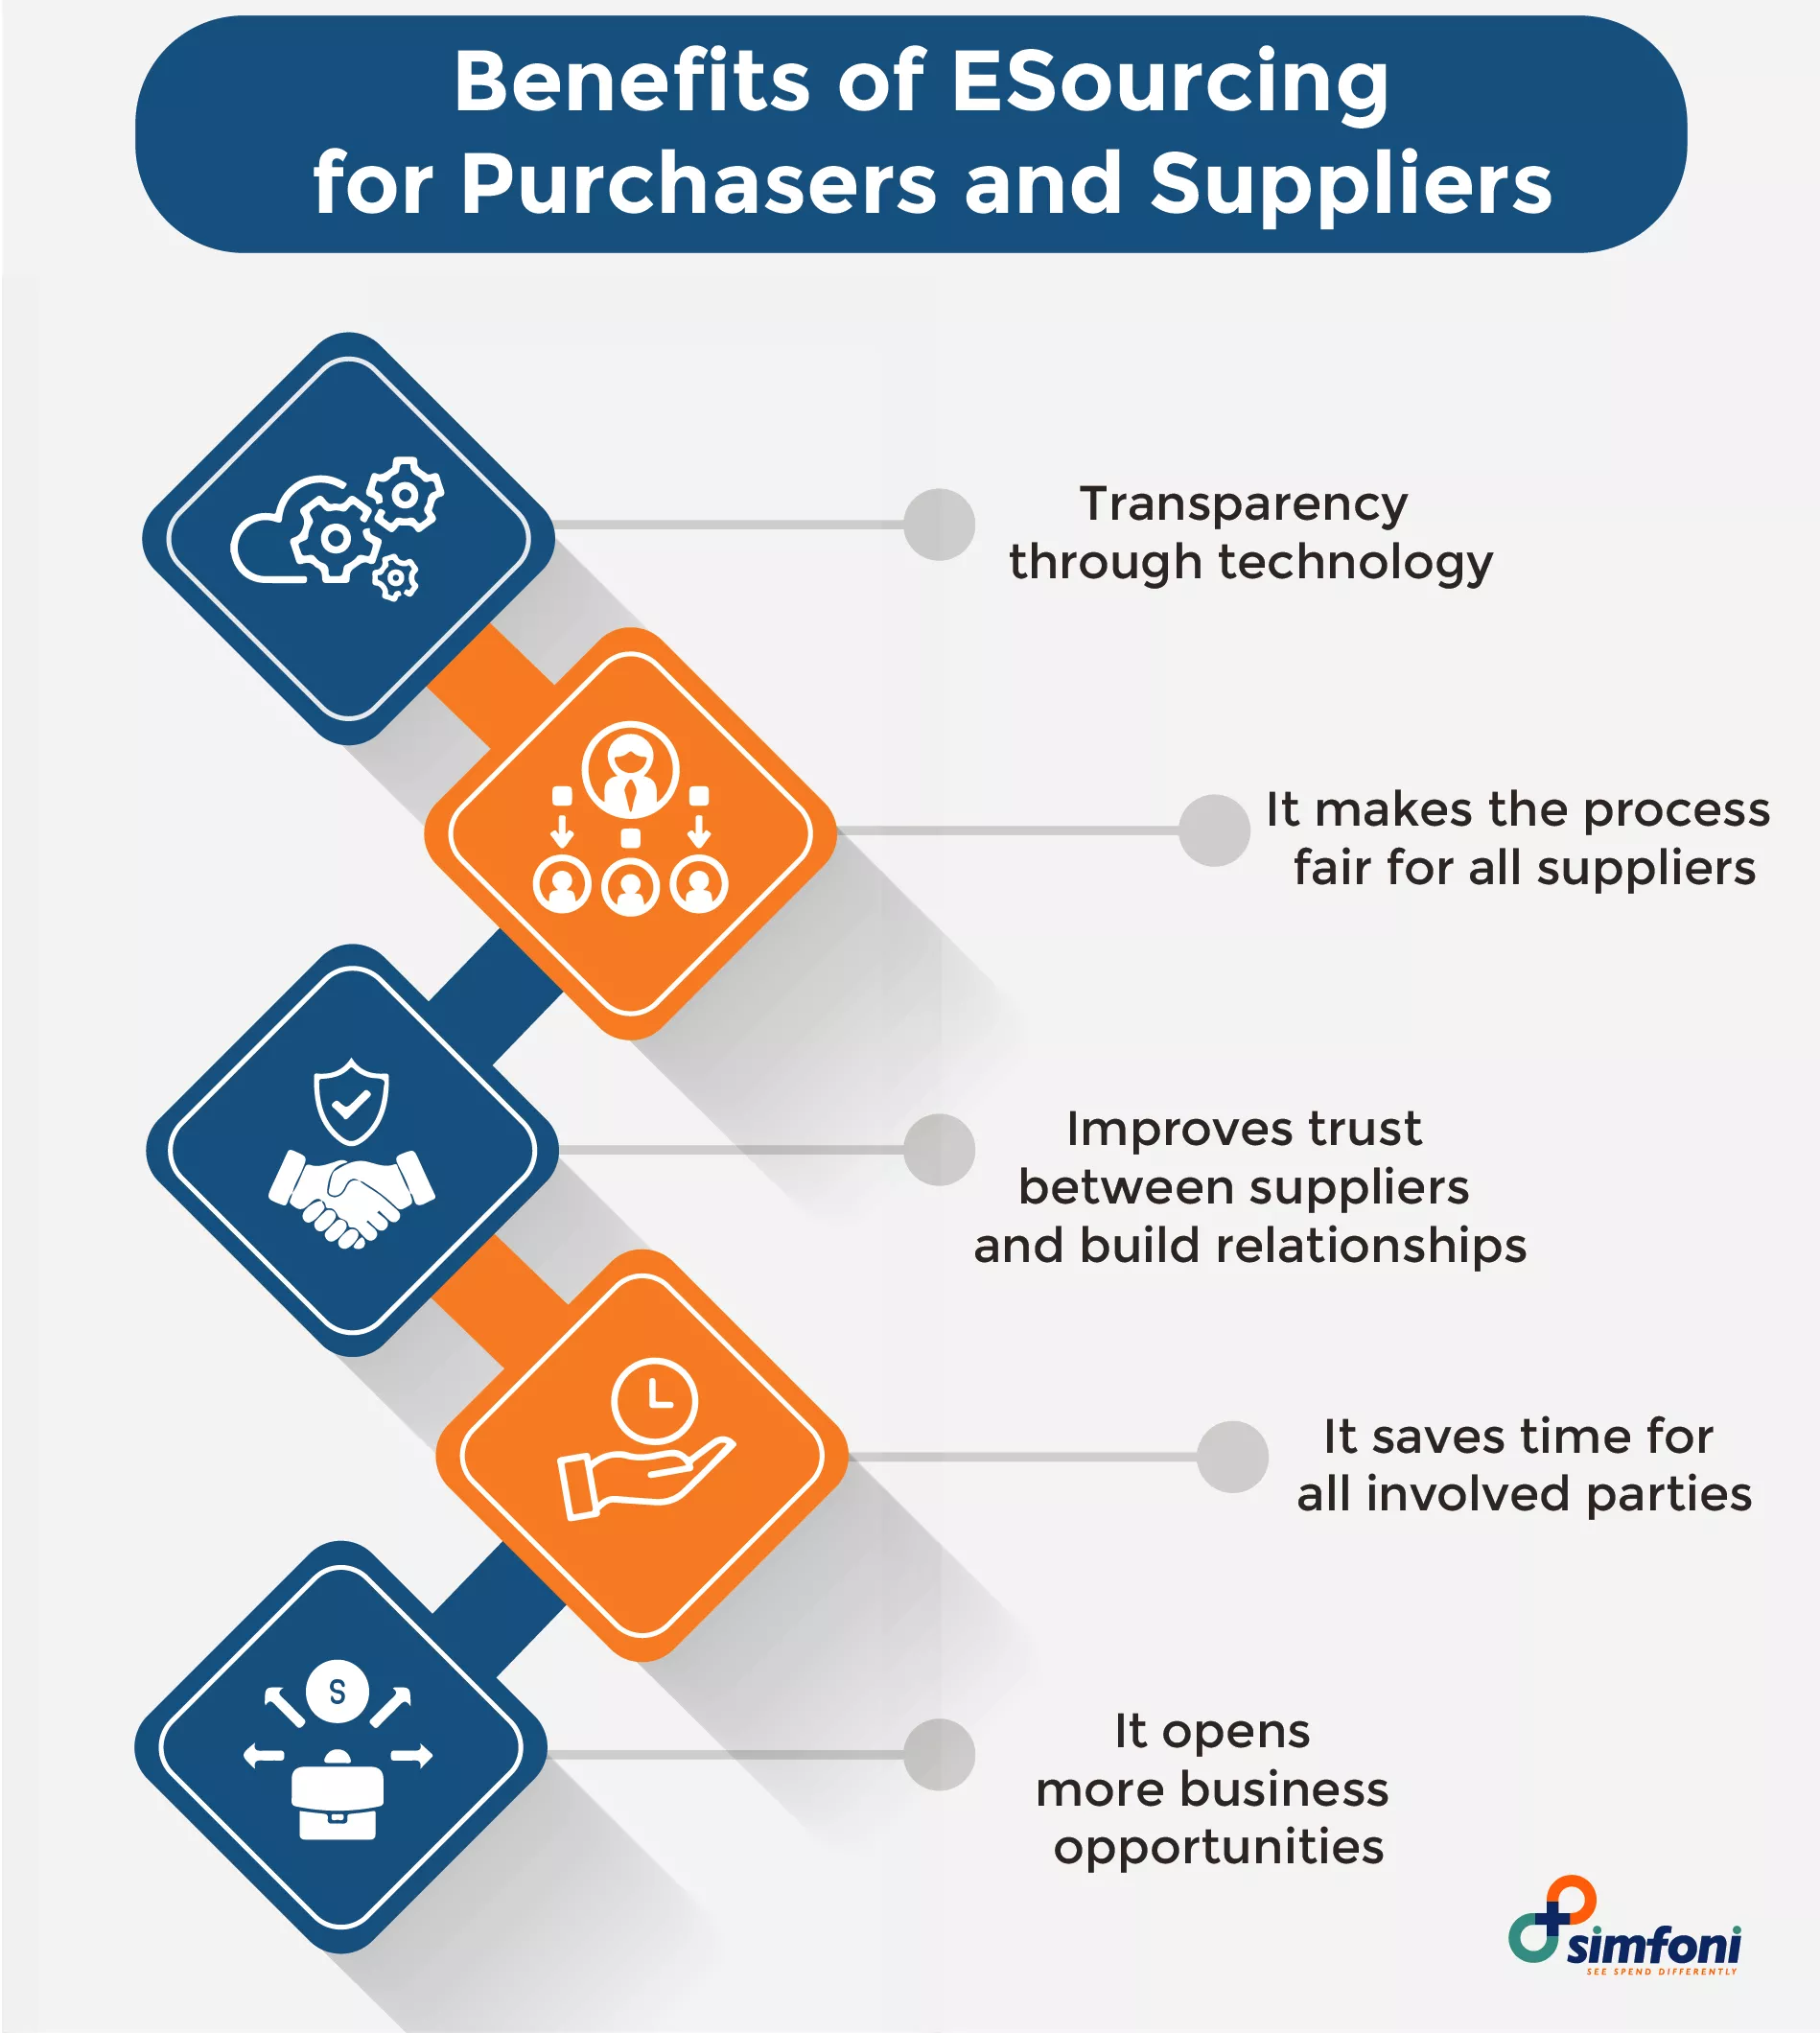 Benefits of ESourcing for Purchasers and Suppliers